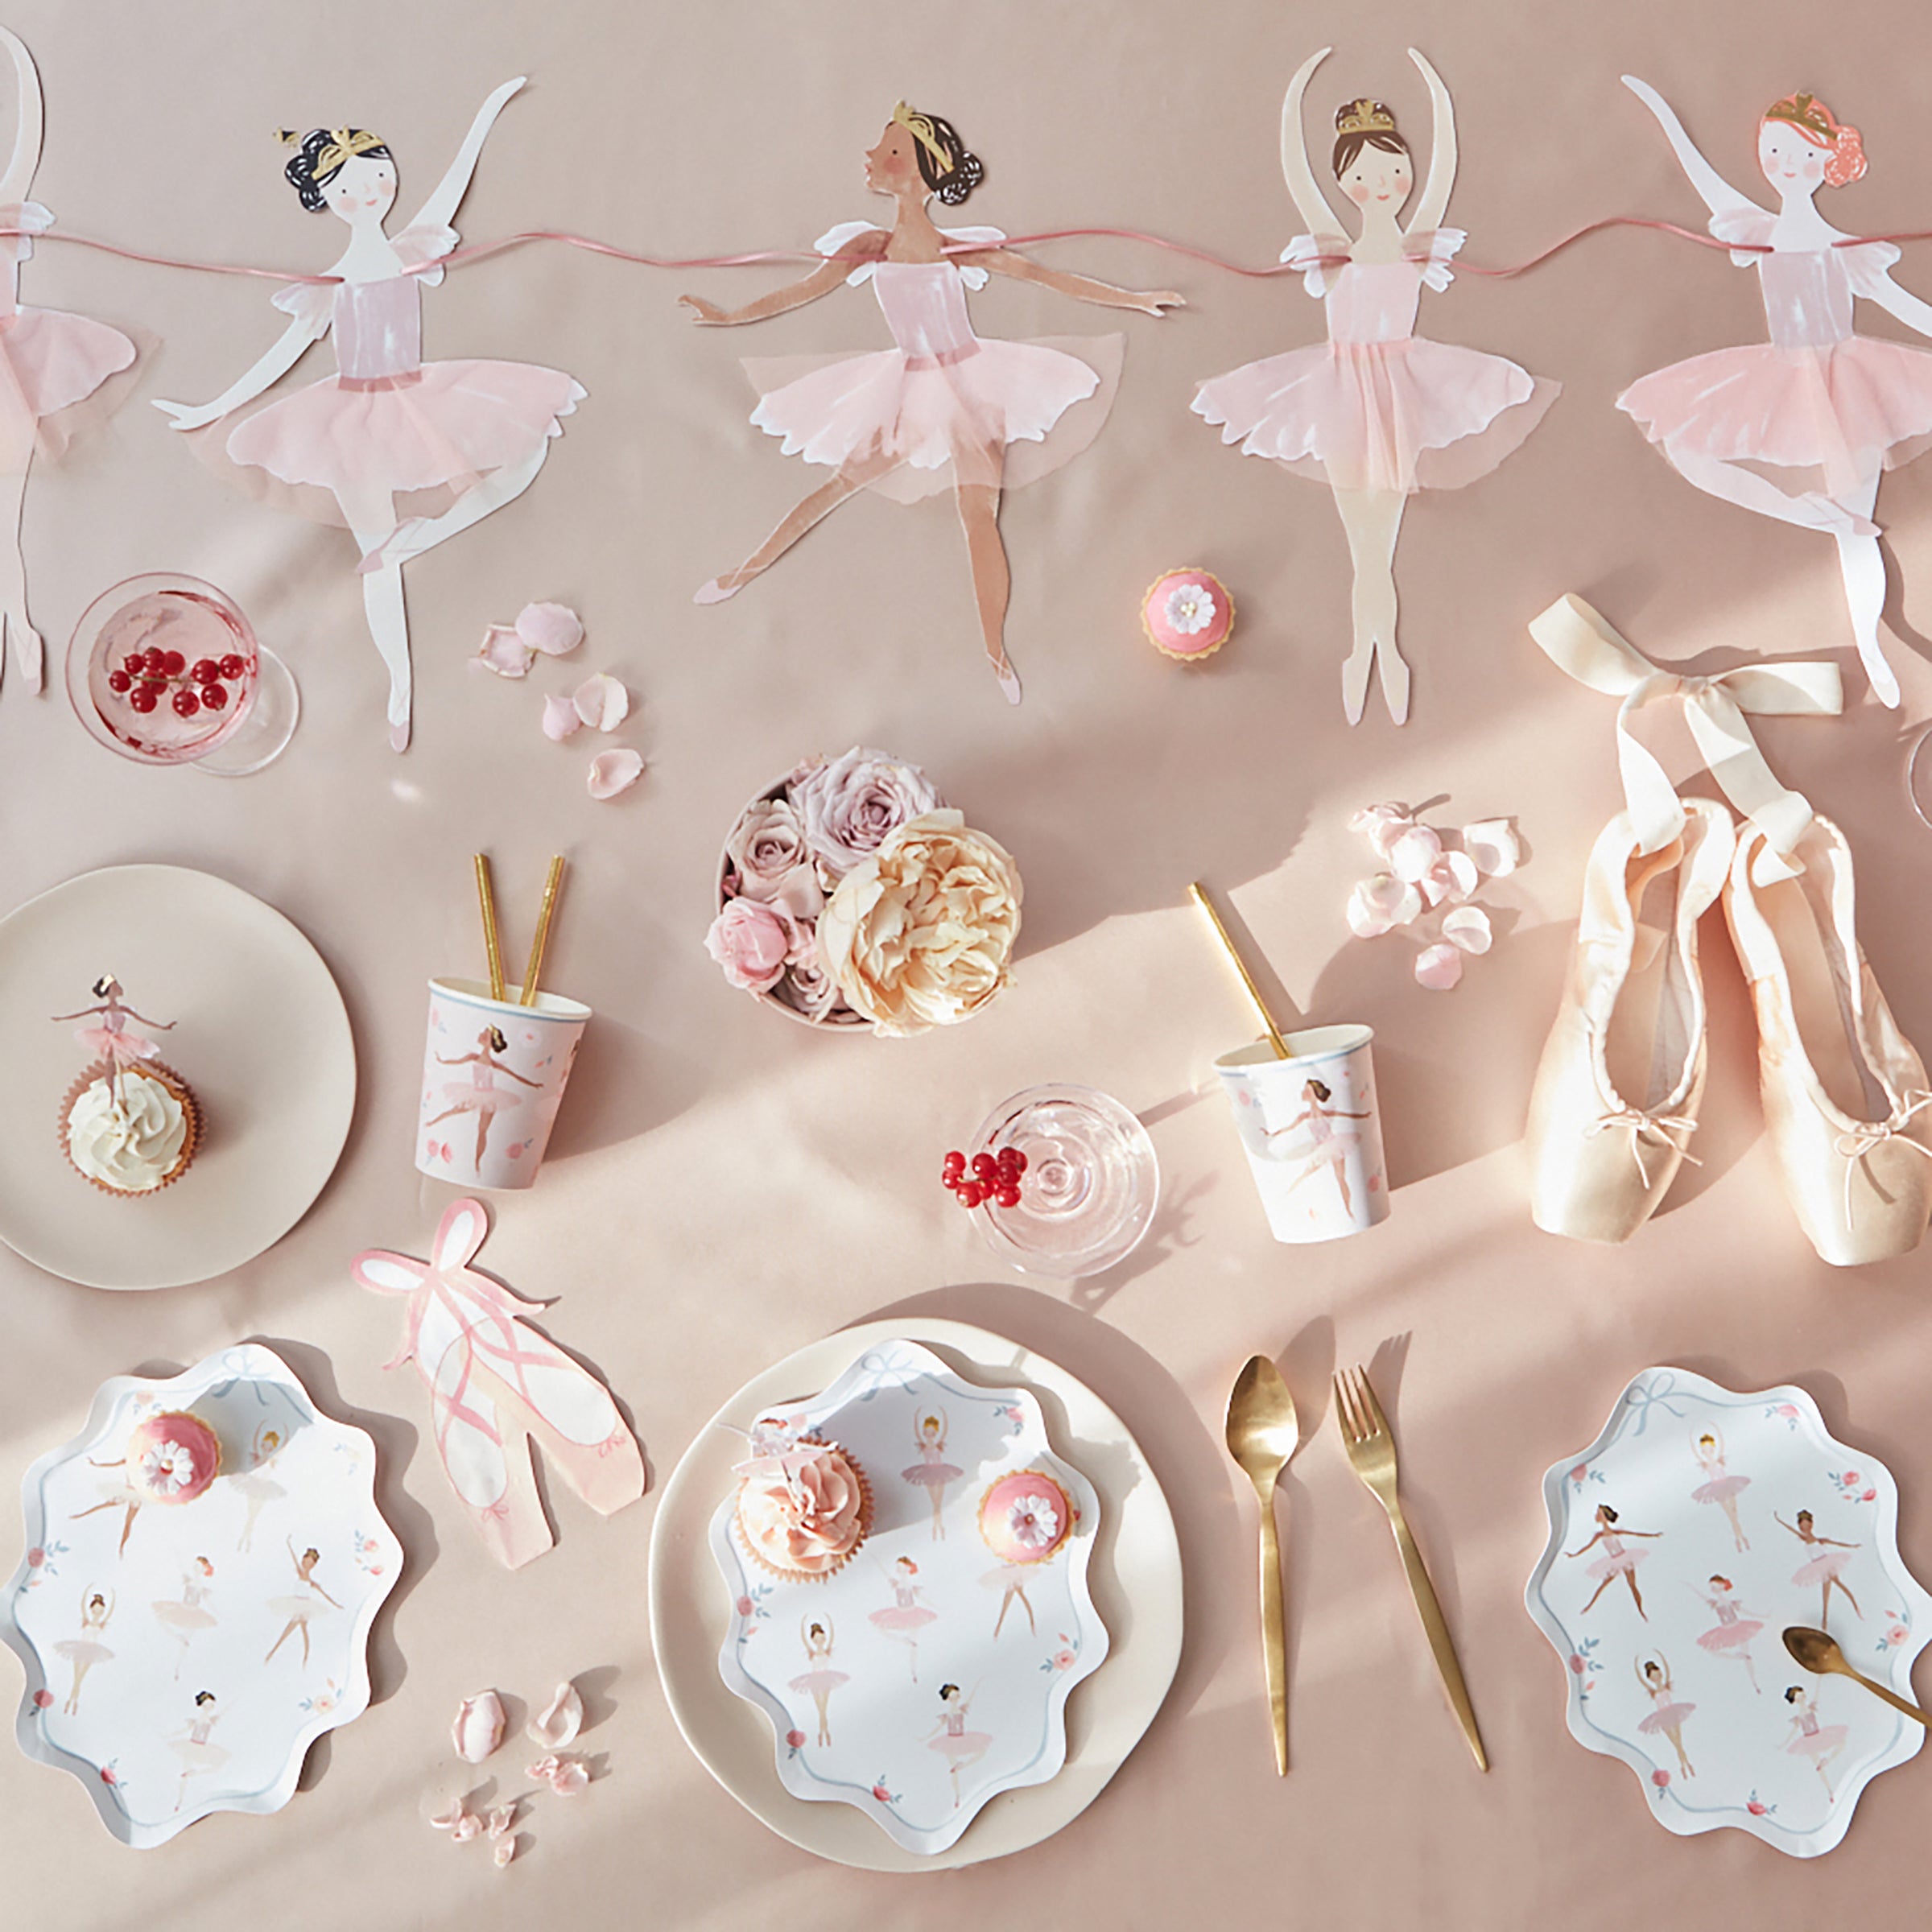 Our party napkins, in the shape of ballet slippers, are perfect to add to your ballerina party supplies.